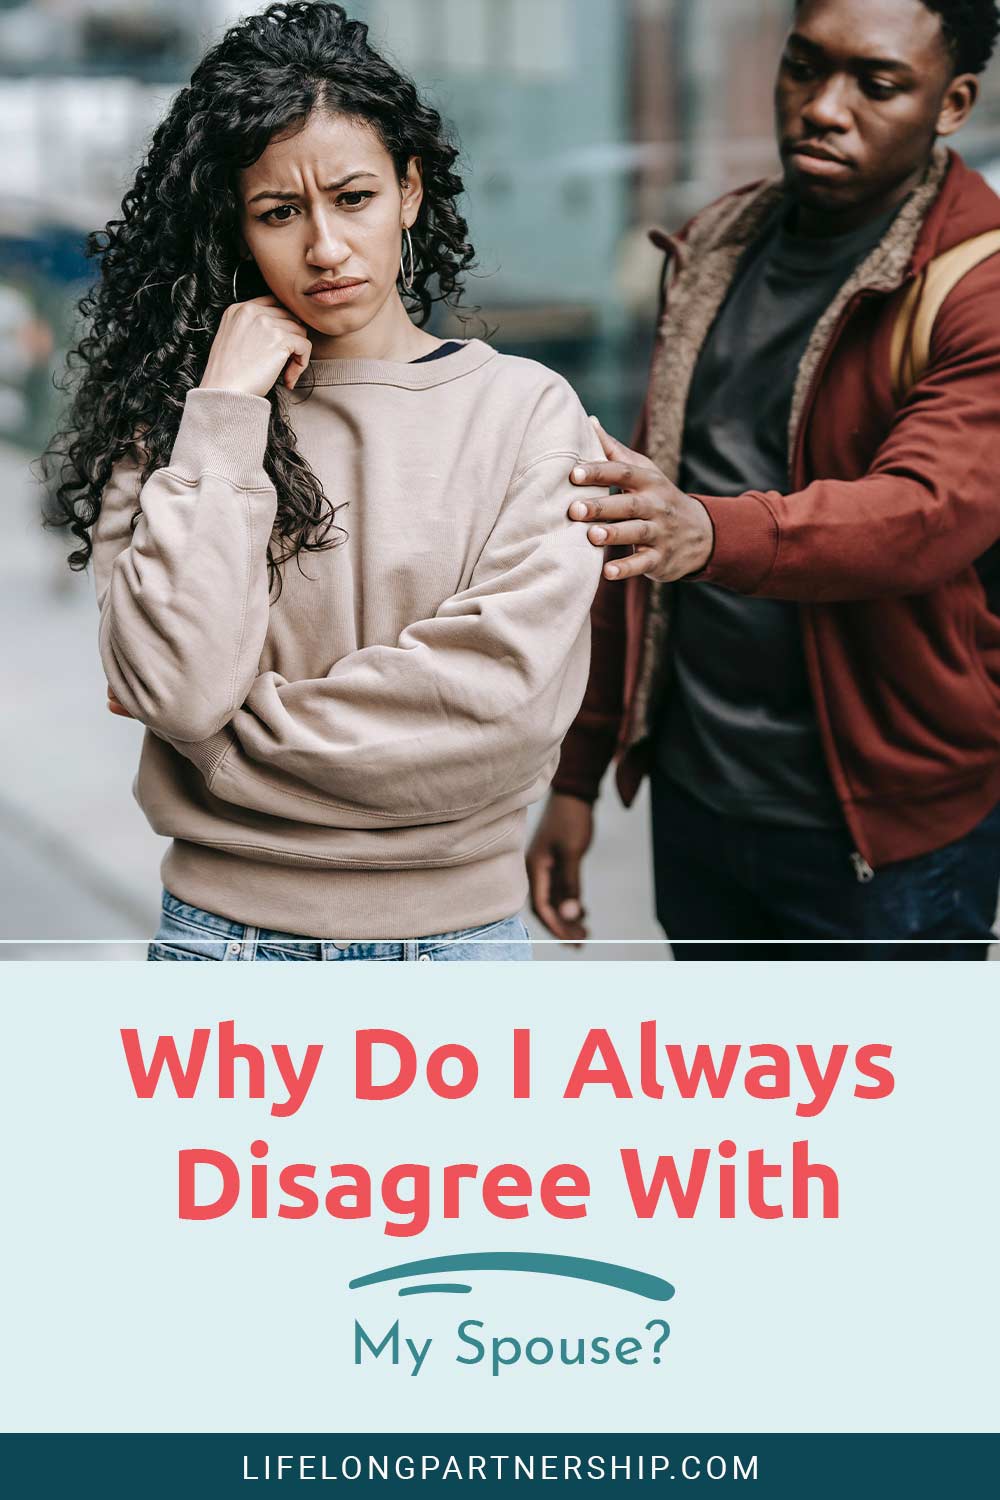 Man trying to convince woman who looks sad - Why Do I Always Disagree With My Spouse?